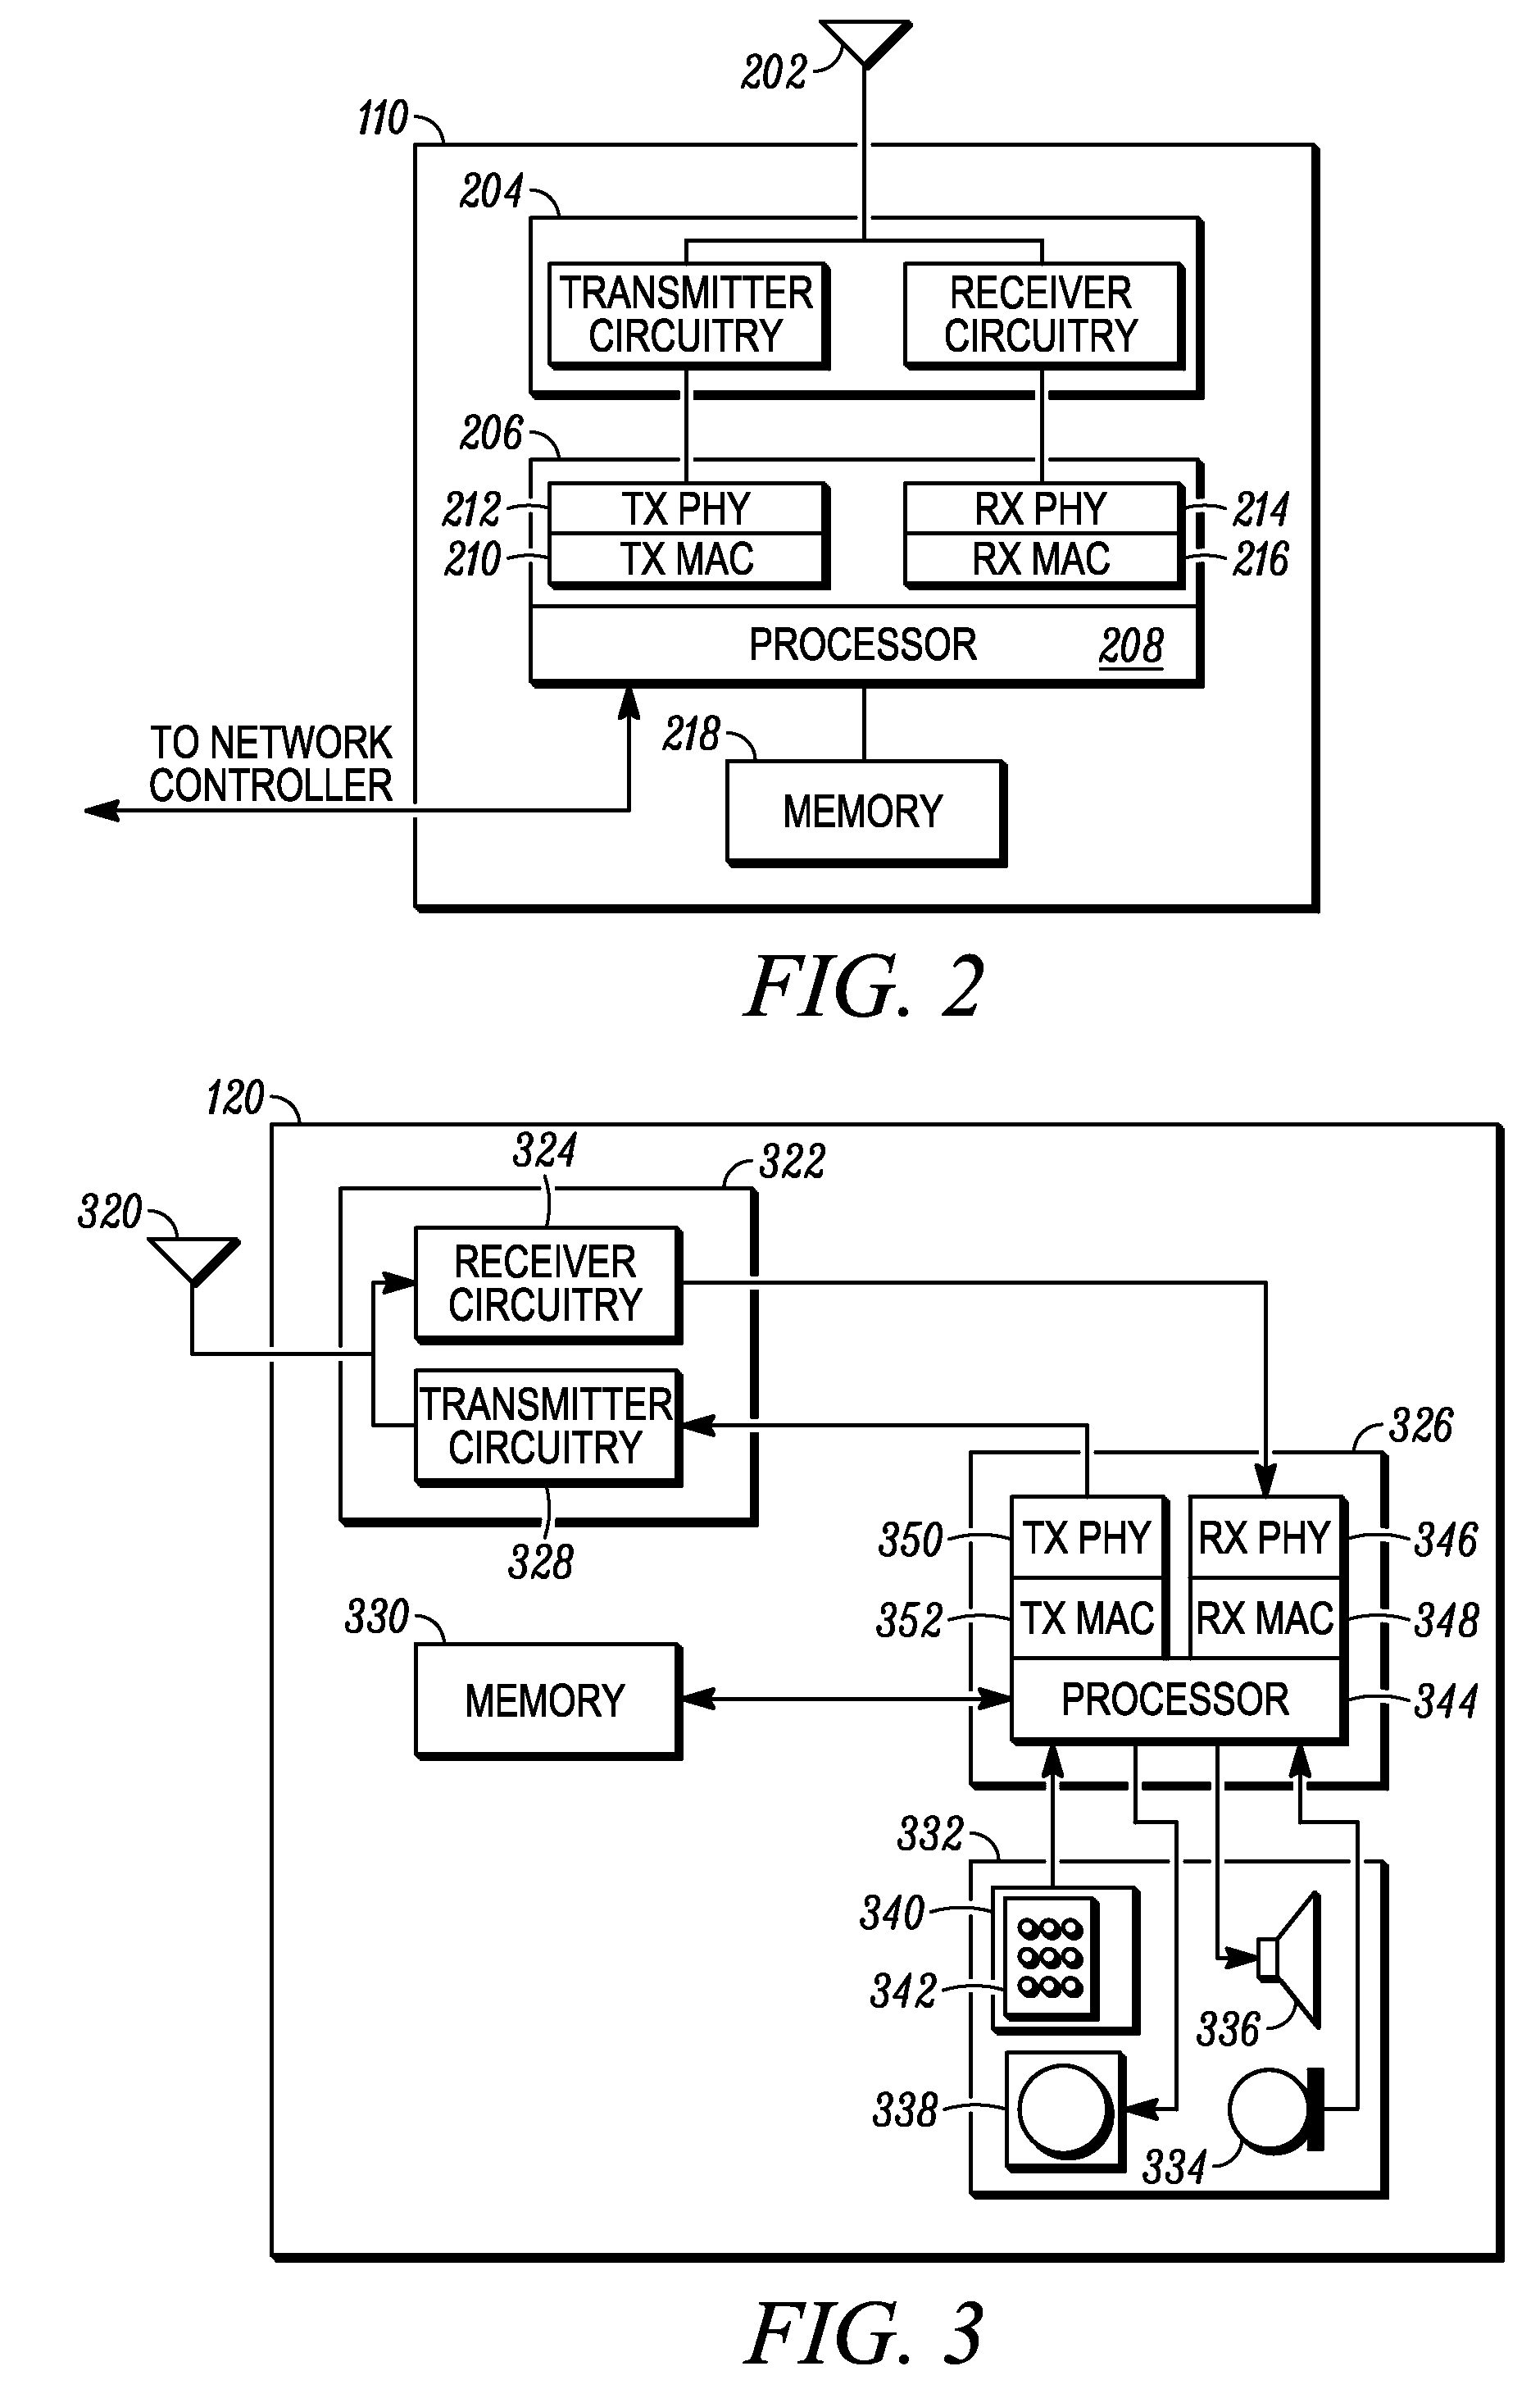 Method and apparatus for reordering fragments within a MAC layer service data unit within a downlink frame